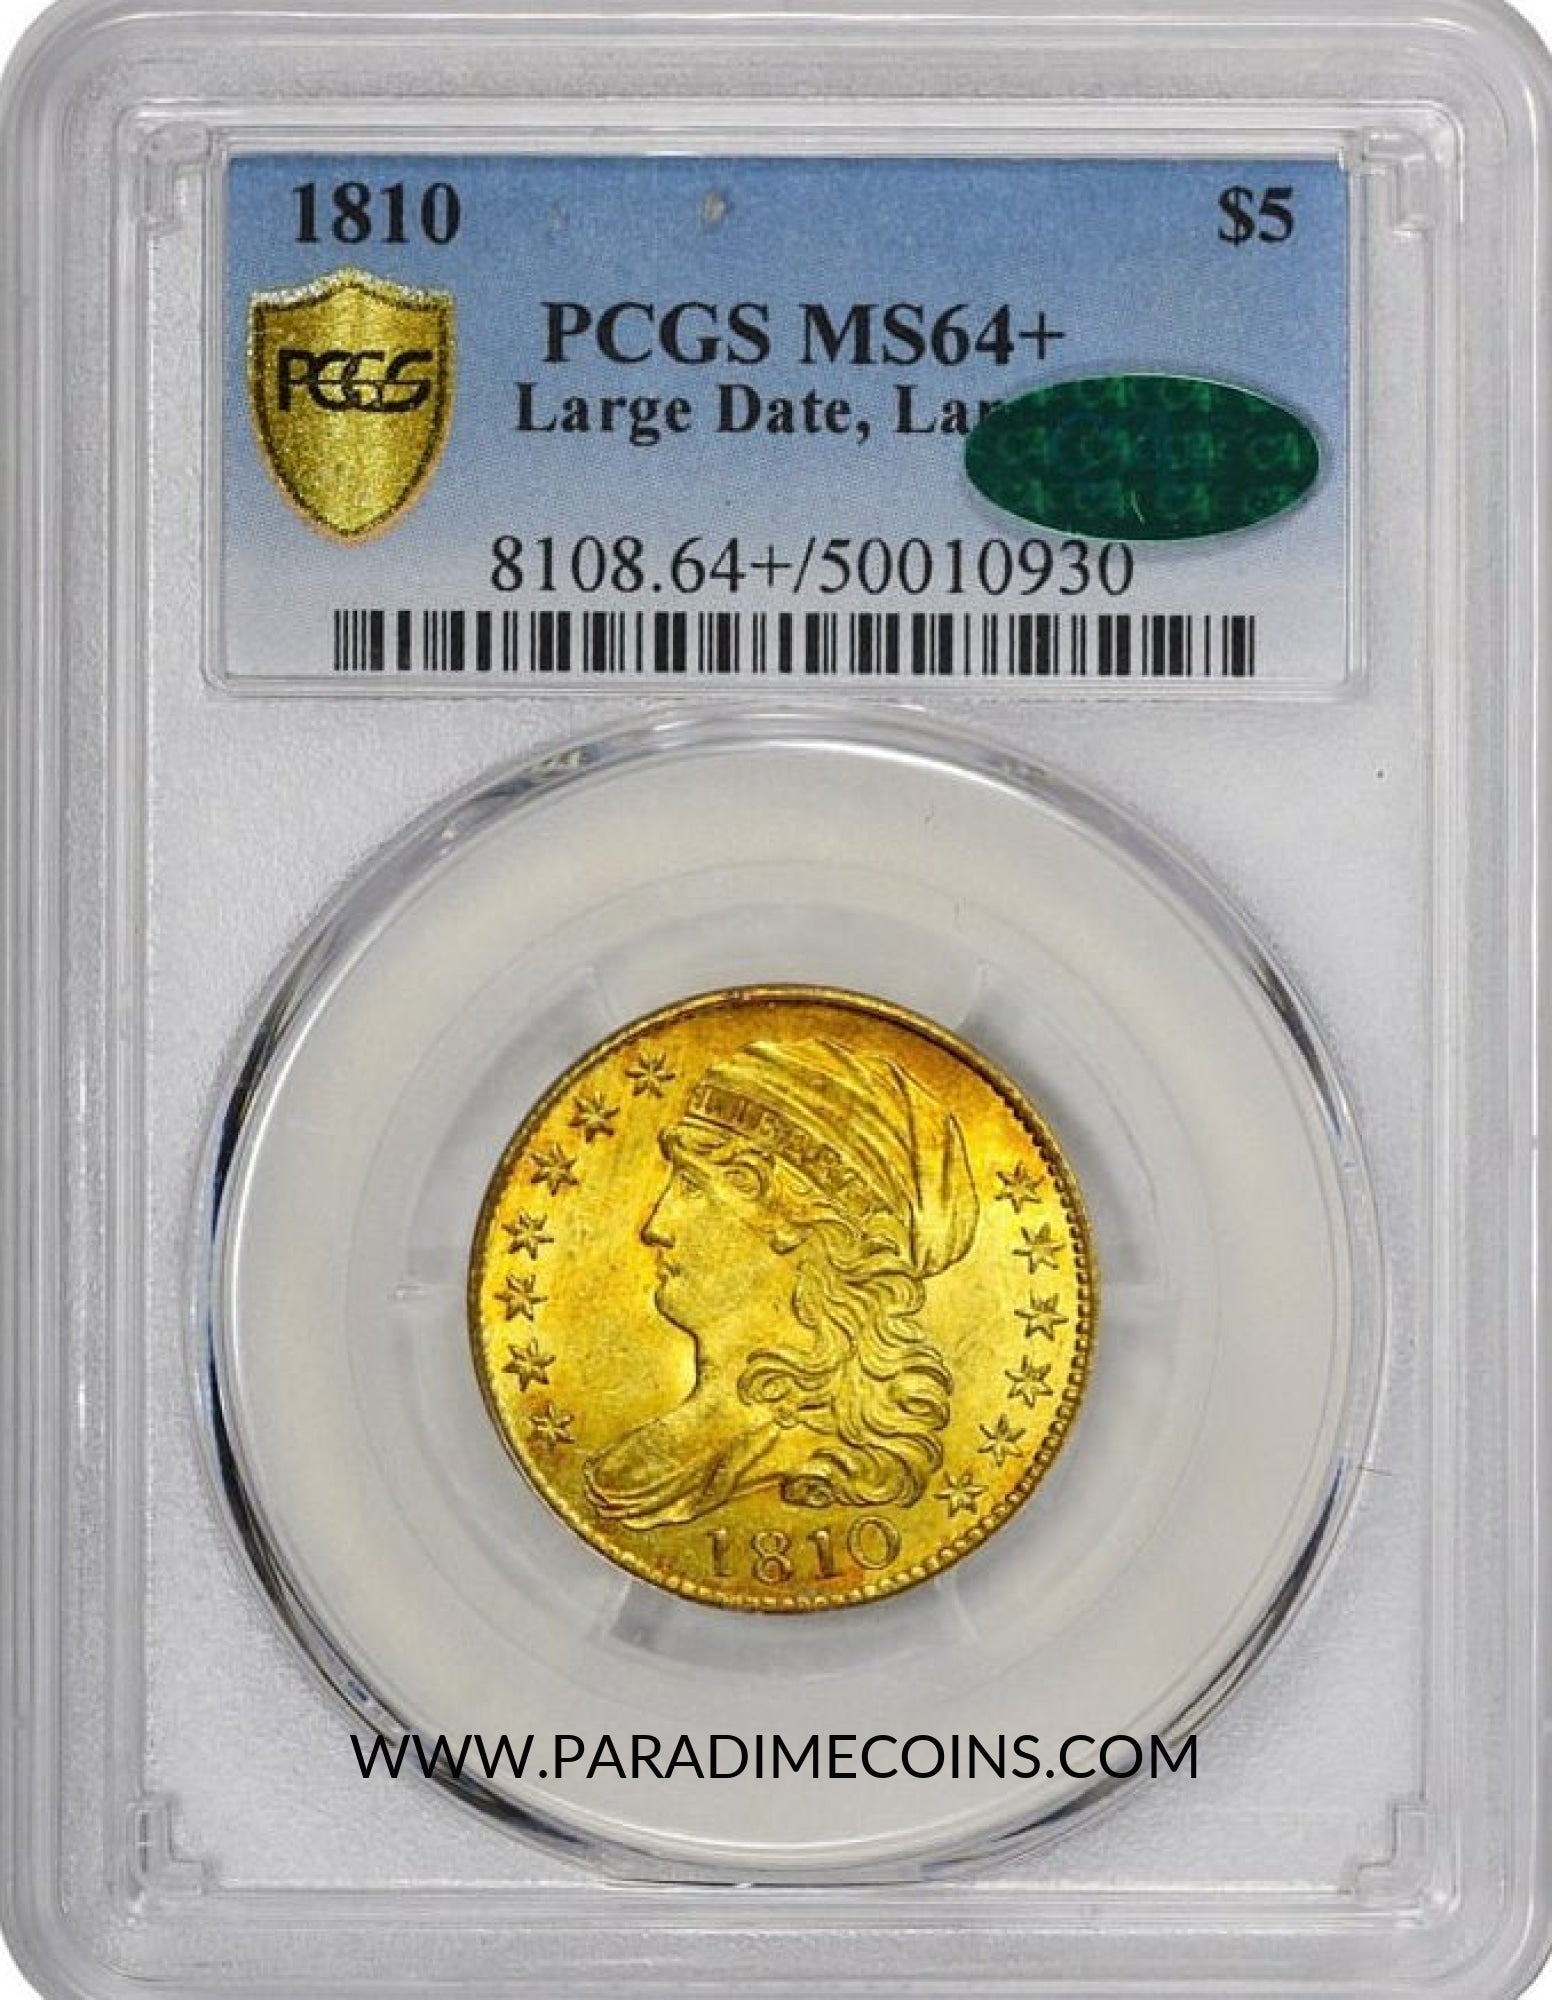 1810 $5 MS64+ LG DT LG 5 PCGS CAC - Paradime Coins | PCGS NGC CACG CAC Rare US Numismatic Coins For Sale